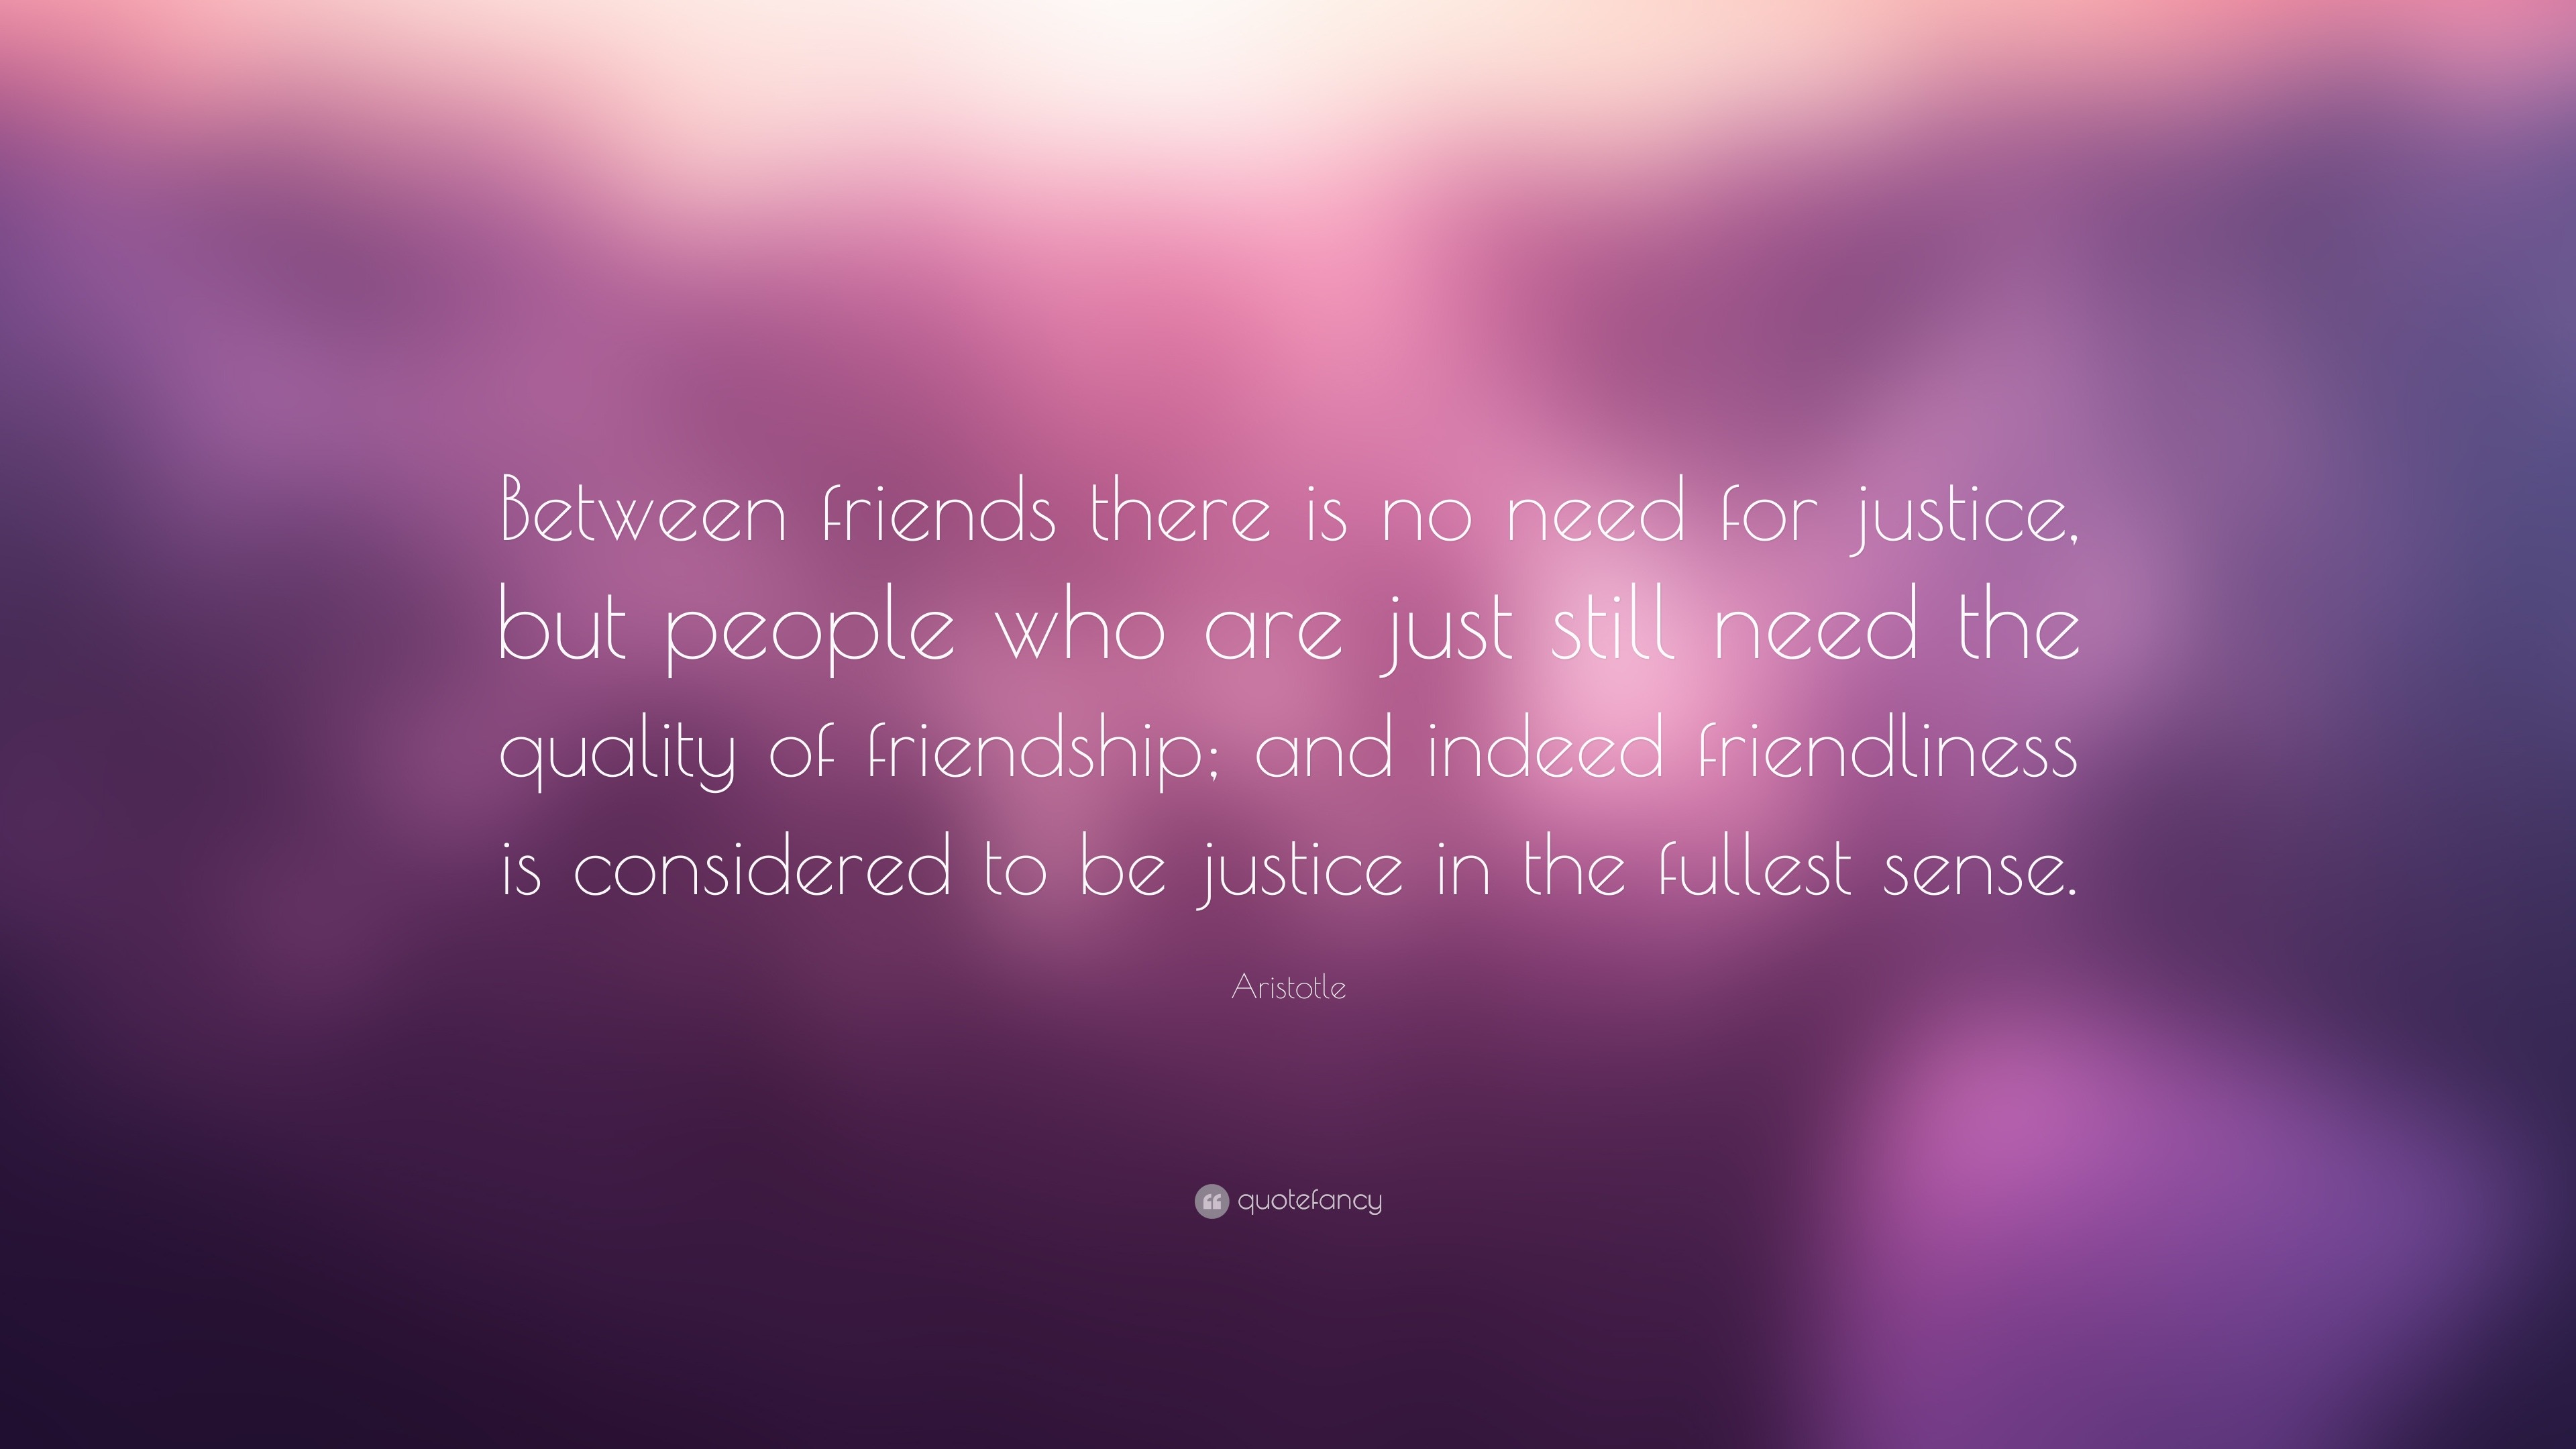 Aristotle Quote: “Between friends there is no need for justice, but ...